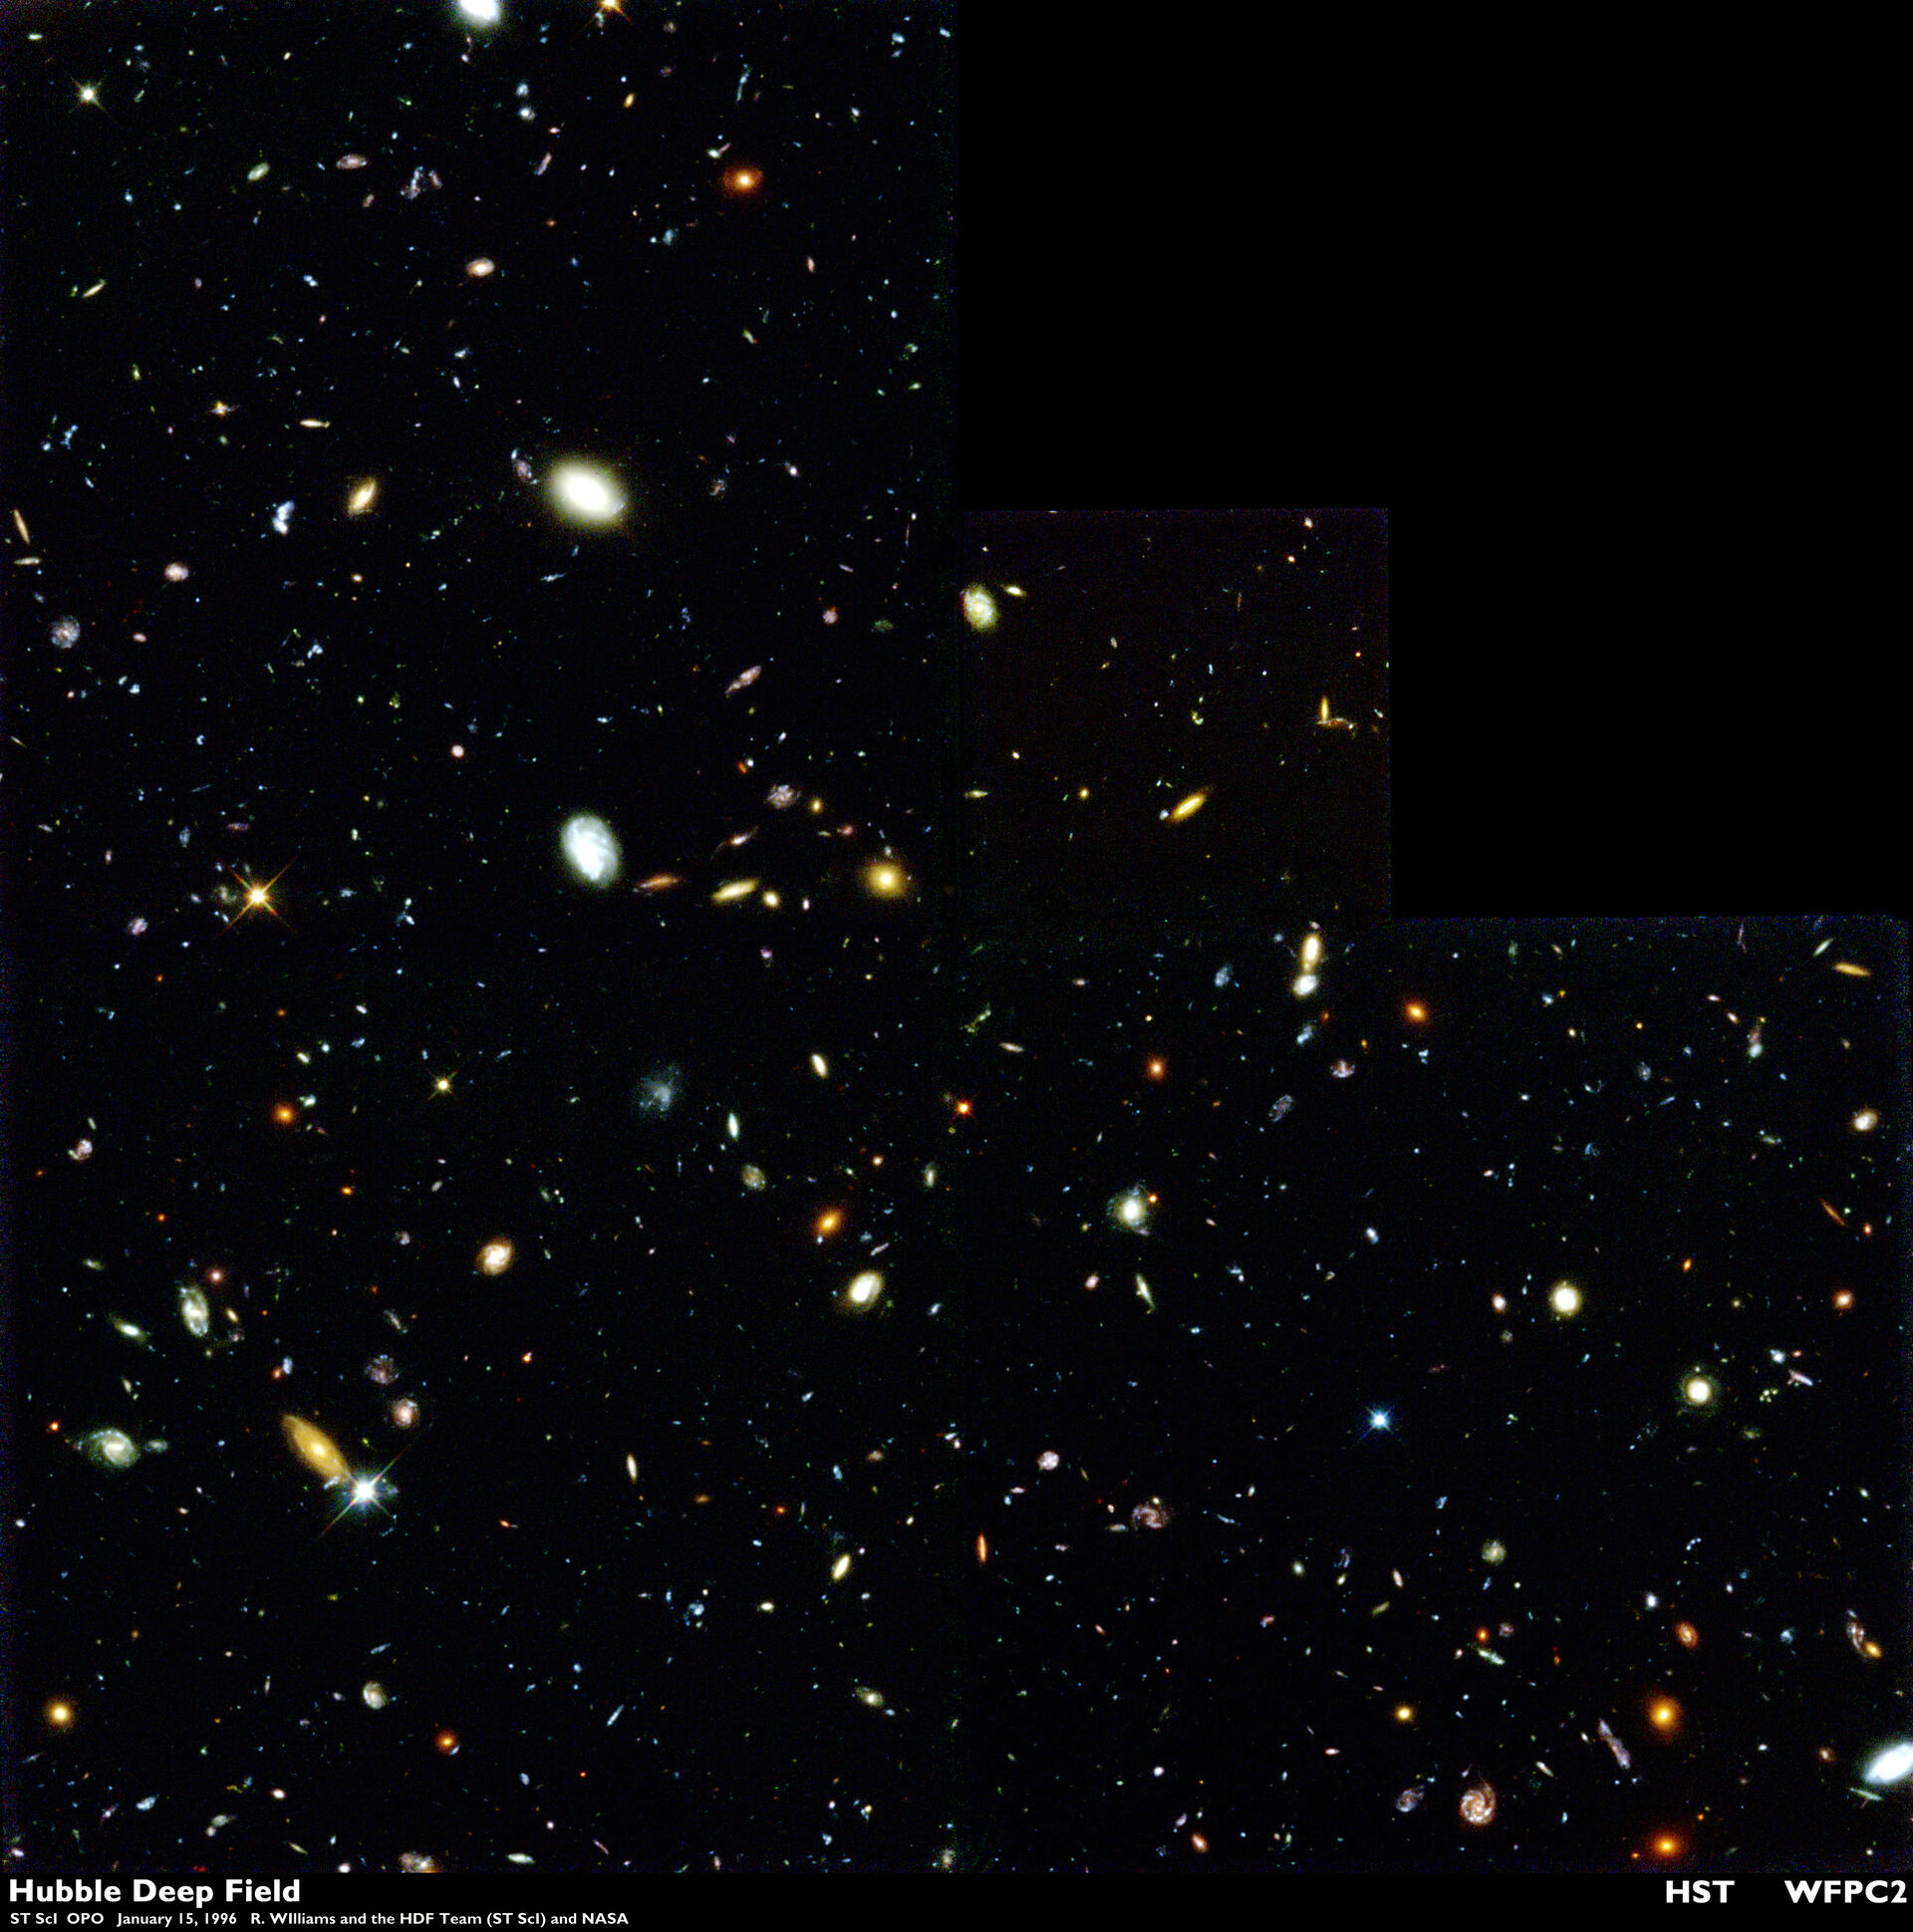 The Hubble Deep Field image shows a large variety of galaxies.